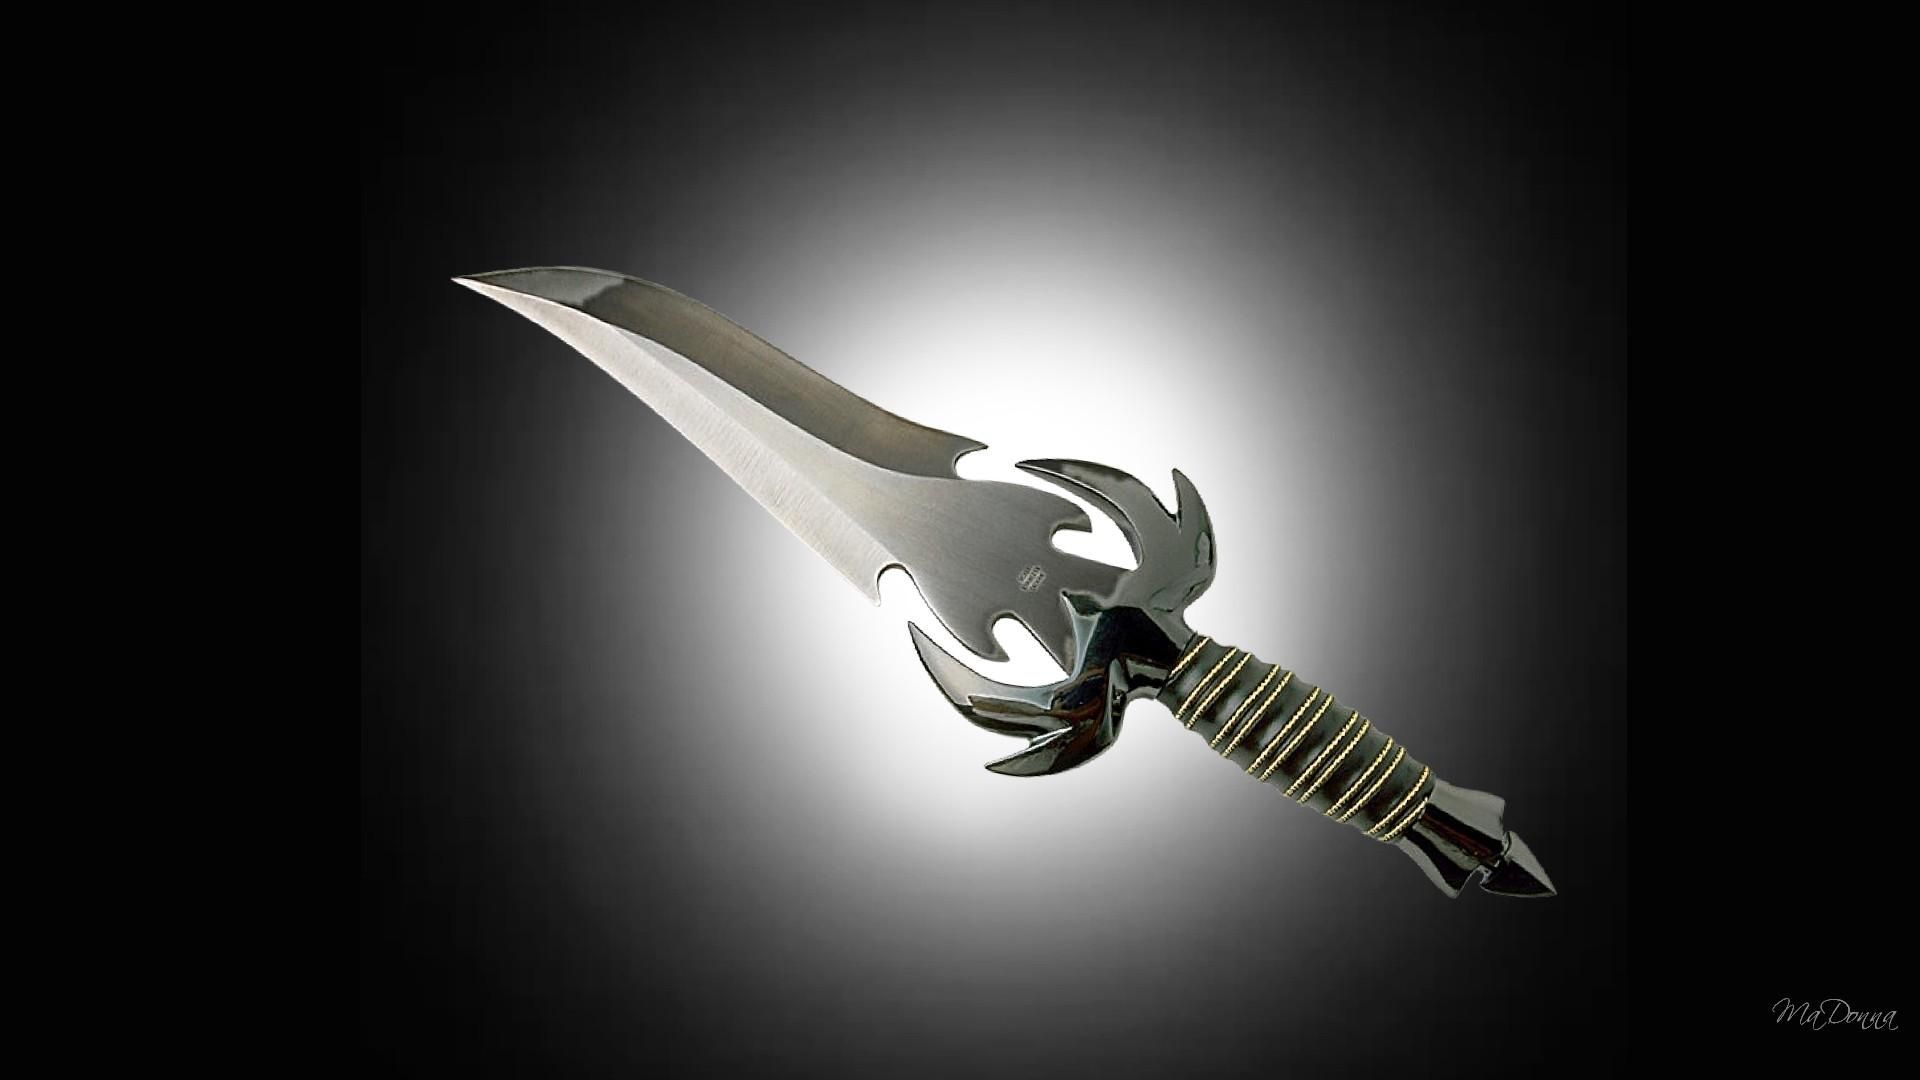 Sword Images and Stock Photos 112585 Sword photography and royalty free  pictures available to download from thousands of stock photo providers